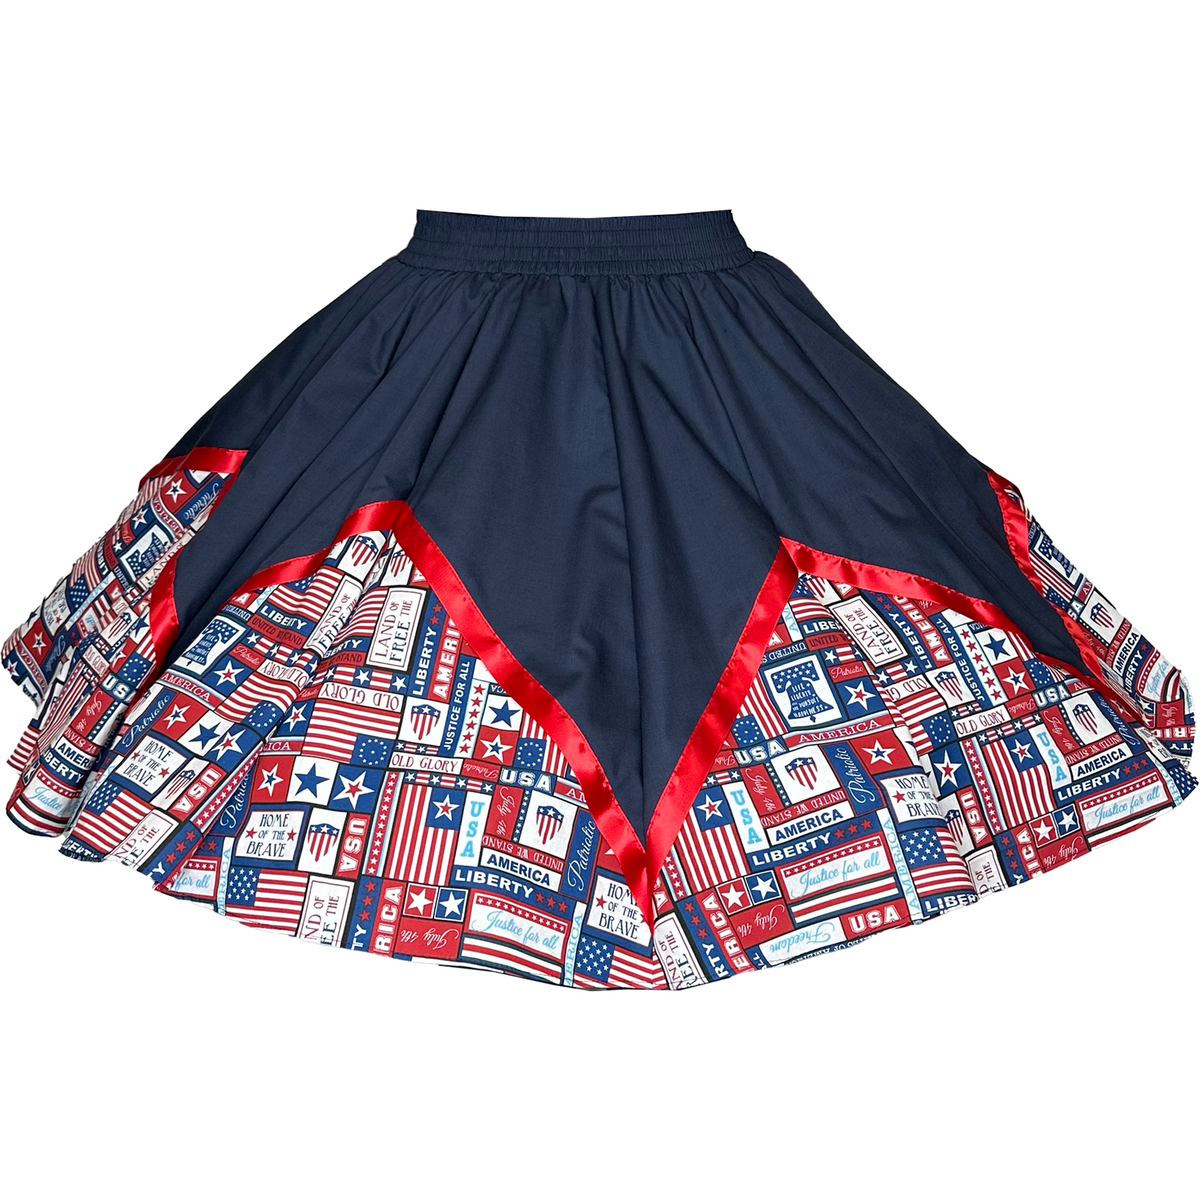 A dark blue 12-gore skirt with a red trim and triangular panels featuring various American-themed prints, including stars, stripes, and phrases like &quot;USA&quot; and &quot;Liberty,&quot; makes the July 4th Square Dance Skirt by Square Up Fashions an iconic American pride outfit.